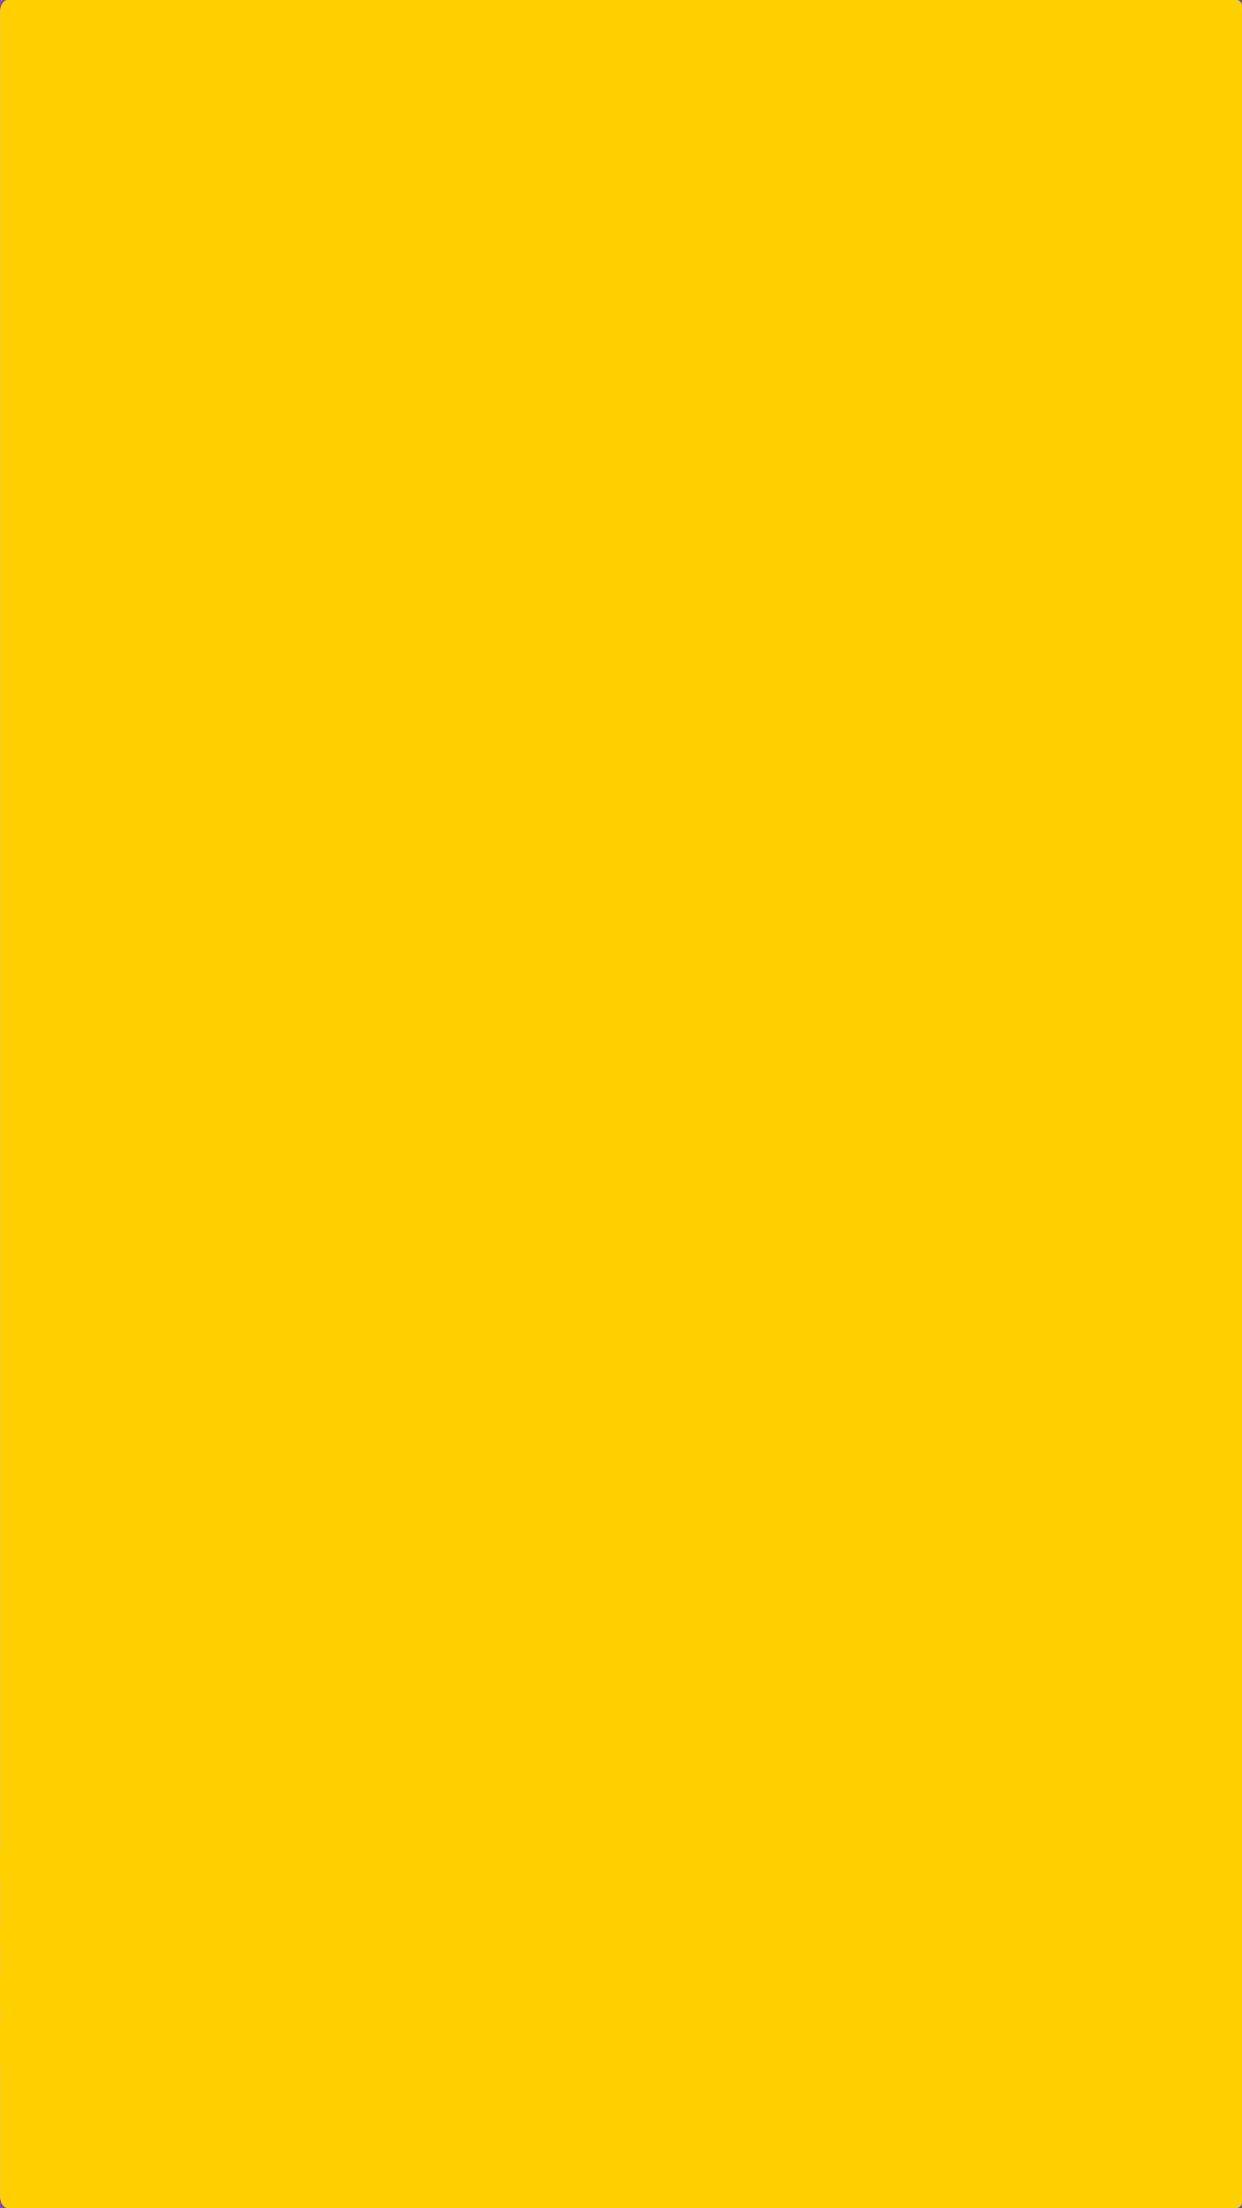 Pure Yellow Wallpapers - Top Free Pure ...